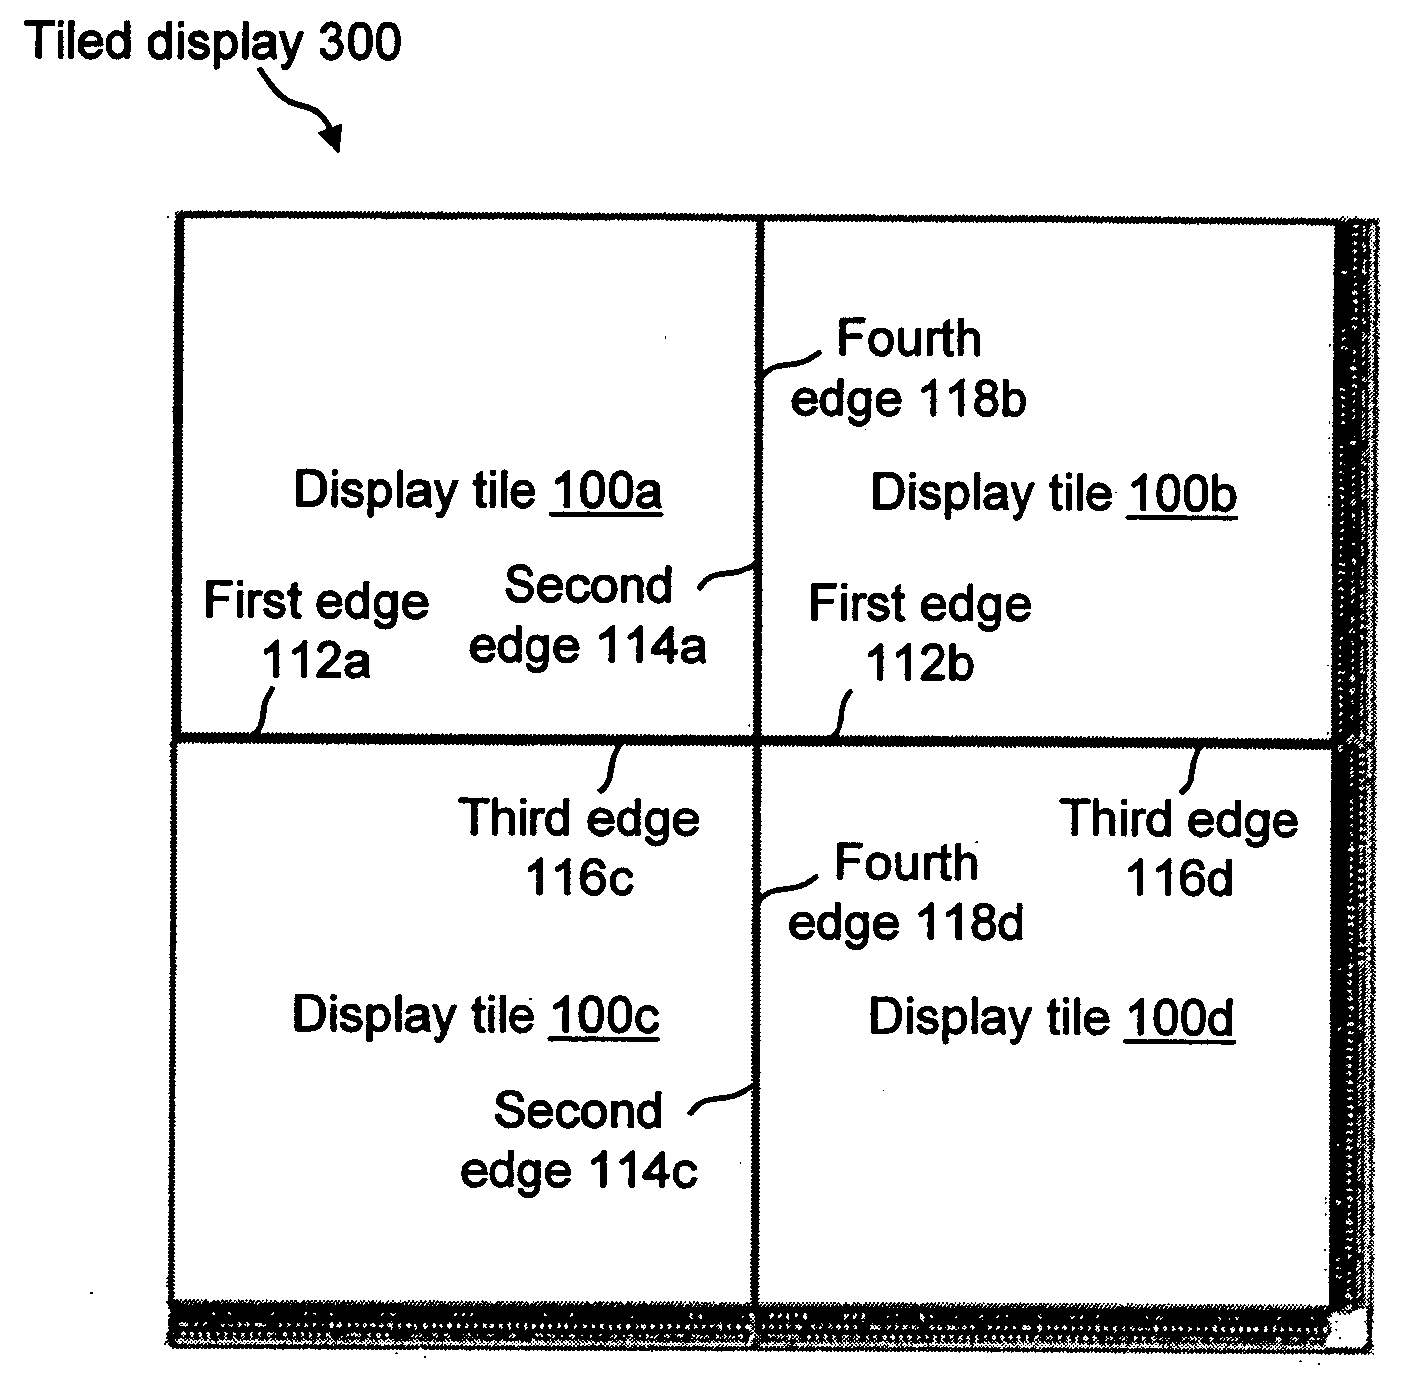 Scalable tiled display assembly for forming a large-area flat-panel display by using modular display tiles